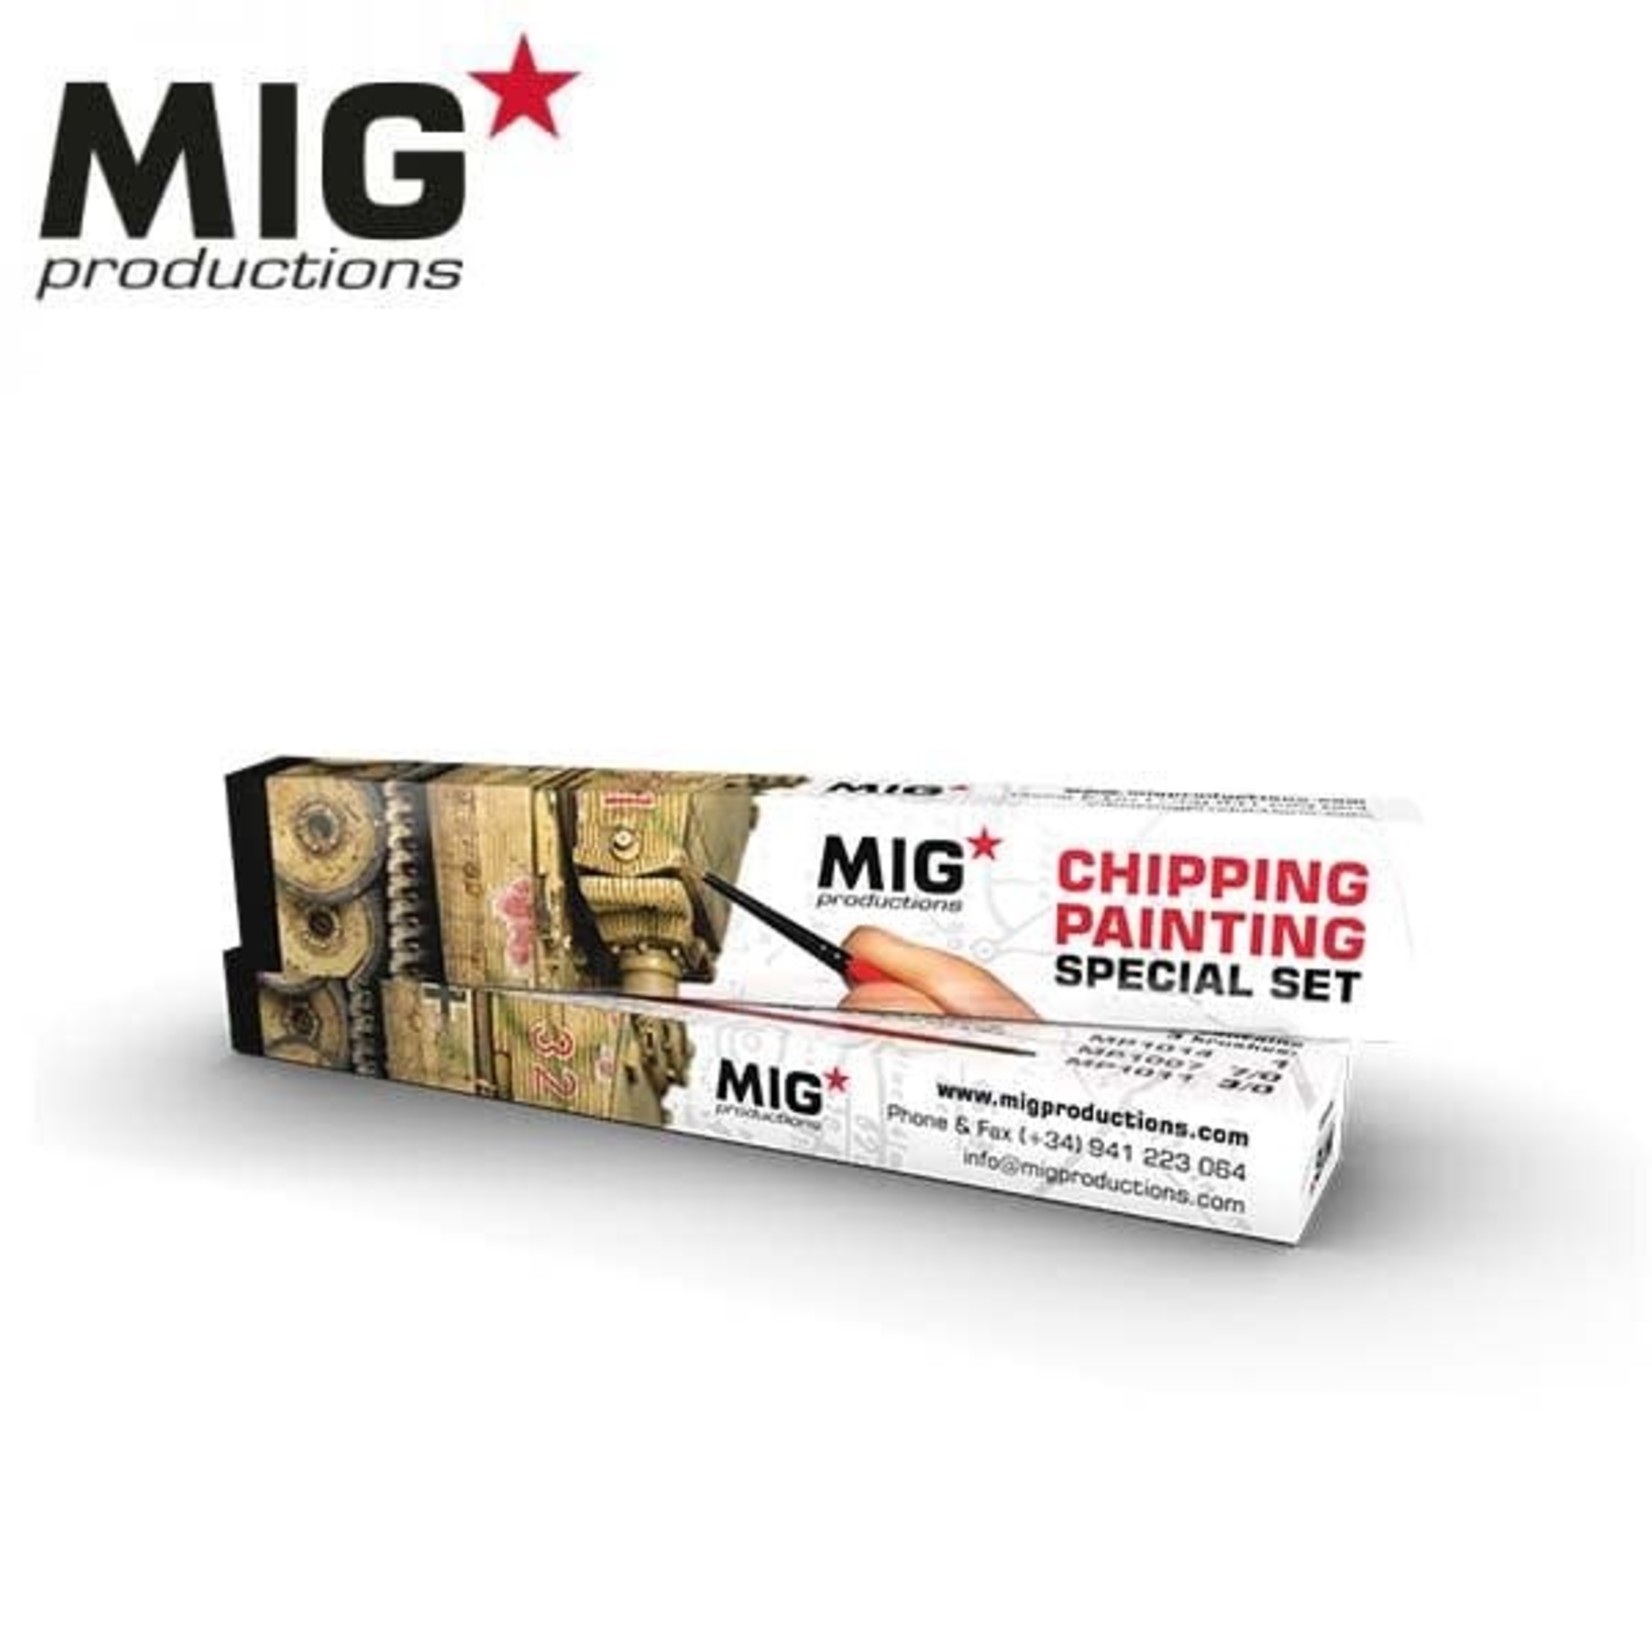 MIG Productions MIG Chipping Painting Special (3) Set